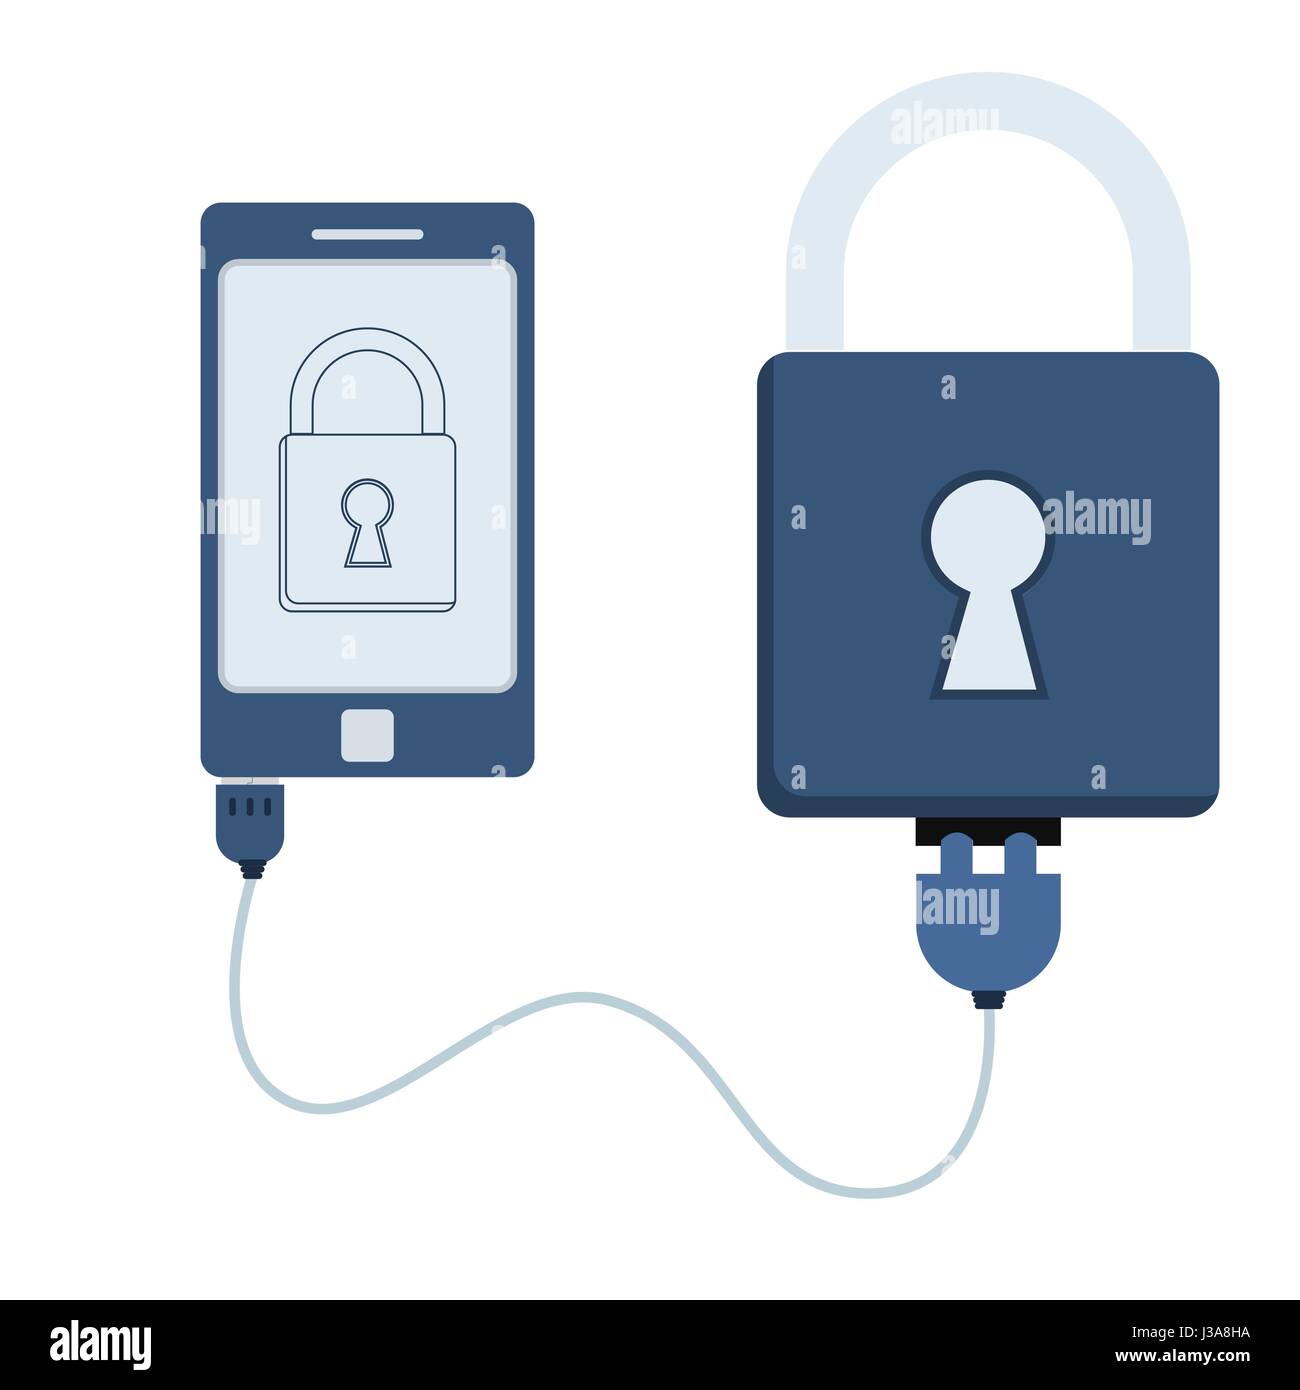 Padlock connected to a cell phone through a usb cable. Outline of the padlock being shown on the mobile monitor. Flat design. Isolated. Stock Vector